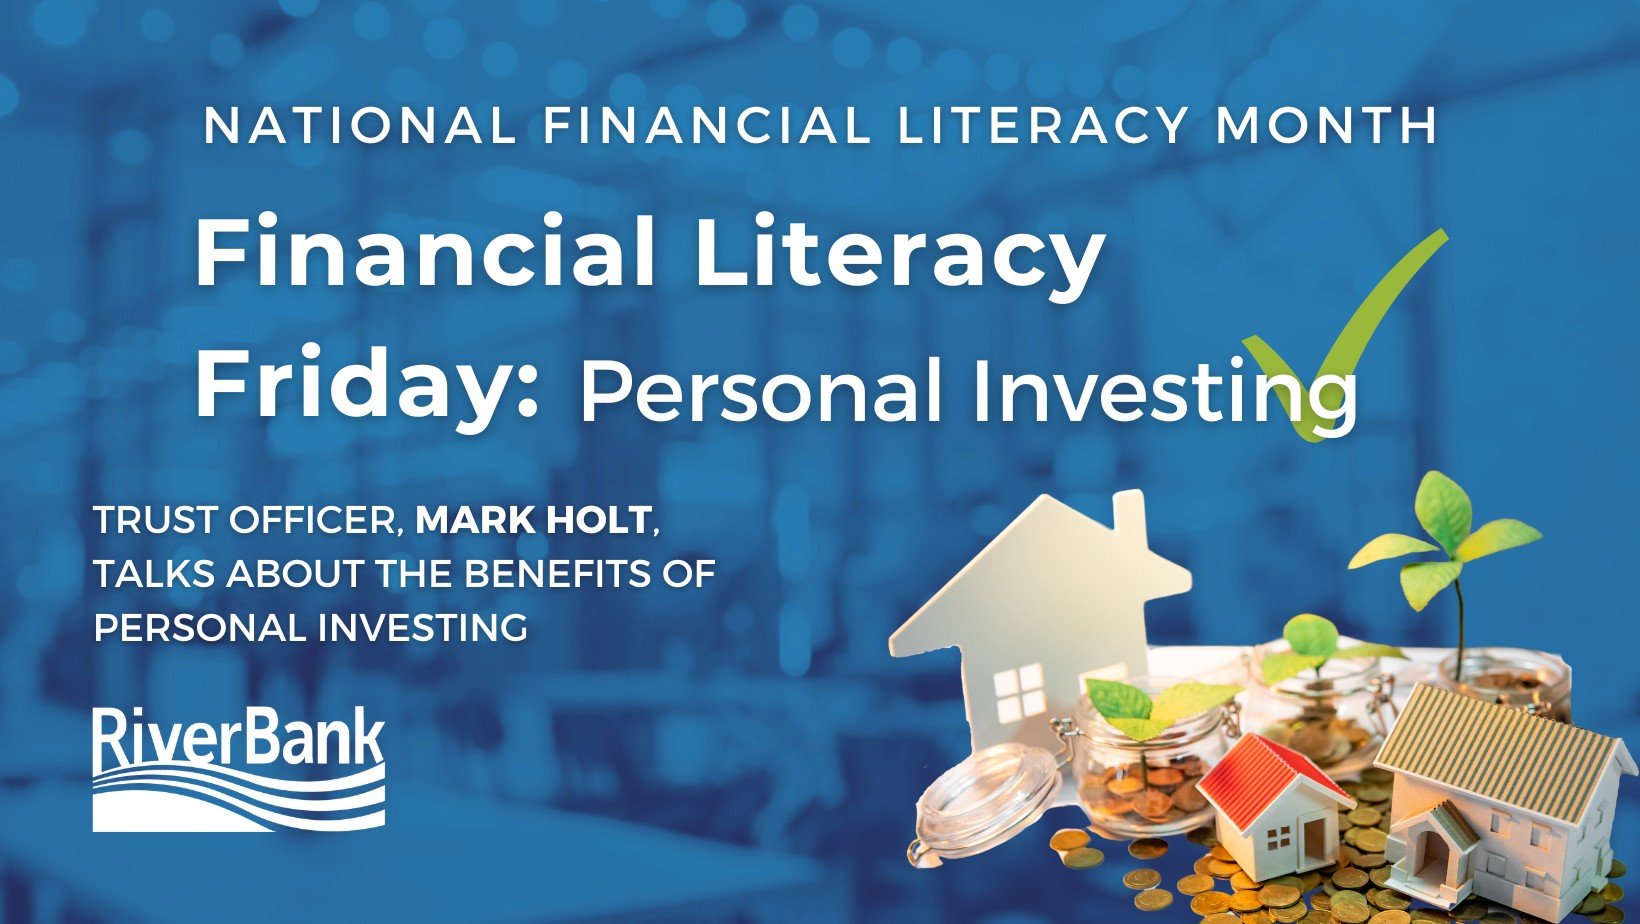 April is Financial Literacy Month, and at RiverBank, we're committed to helping you build a secure financial future. This week, we're highlighting the importance of personal investing and how it can significantly impact your long-term financial healt